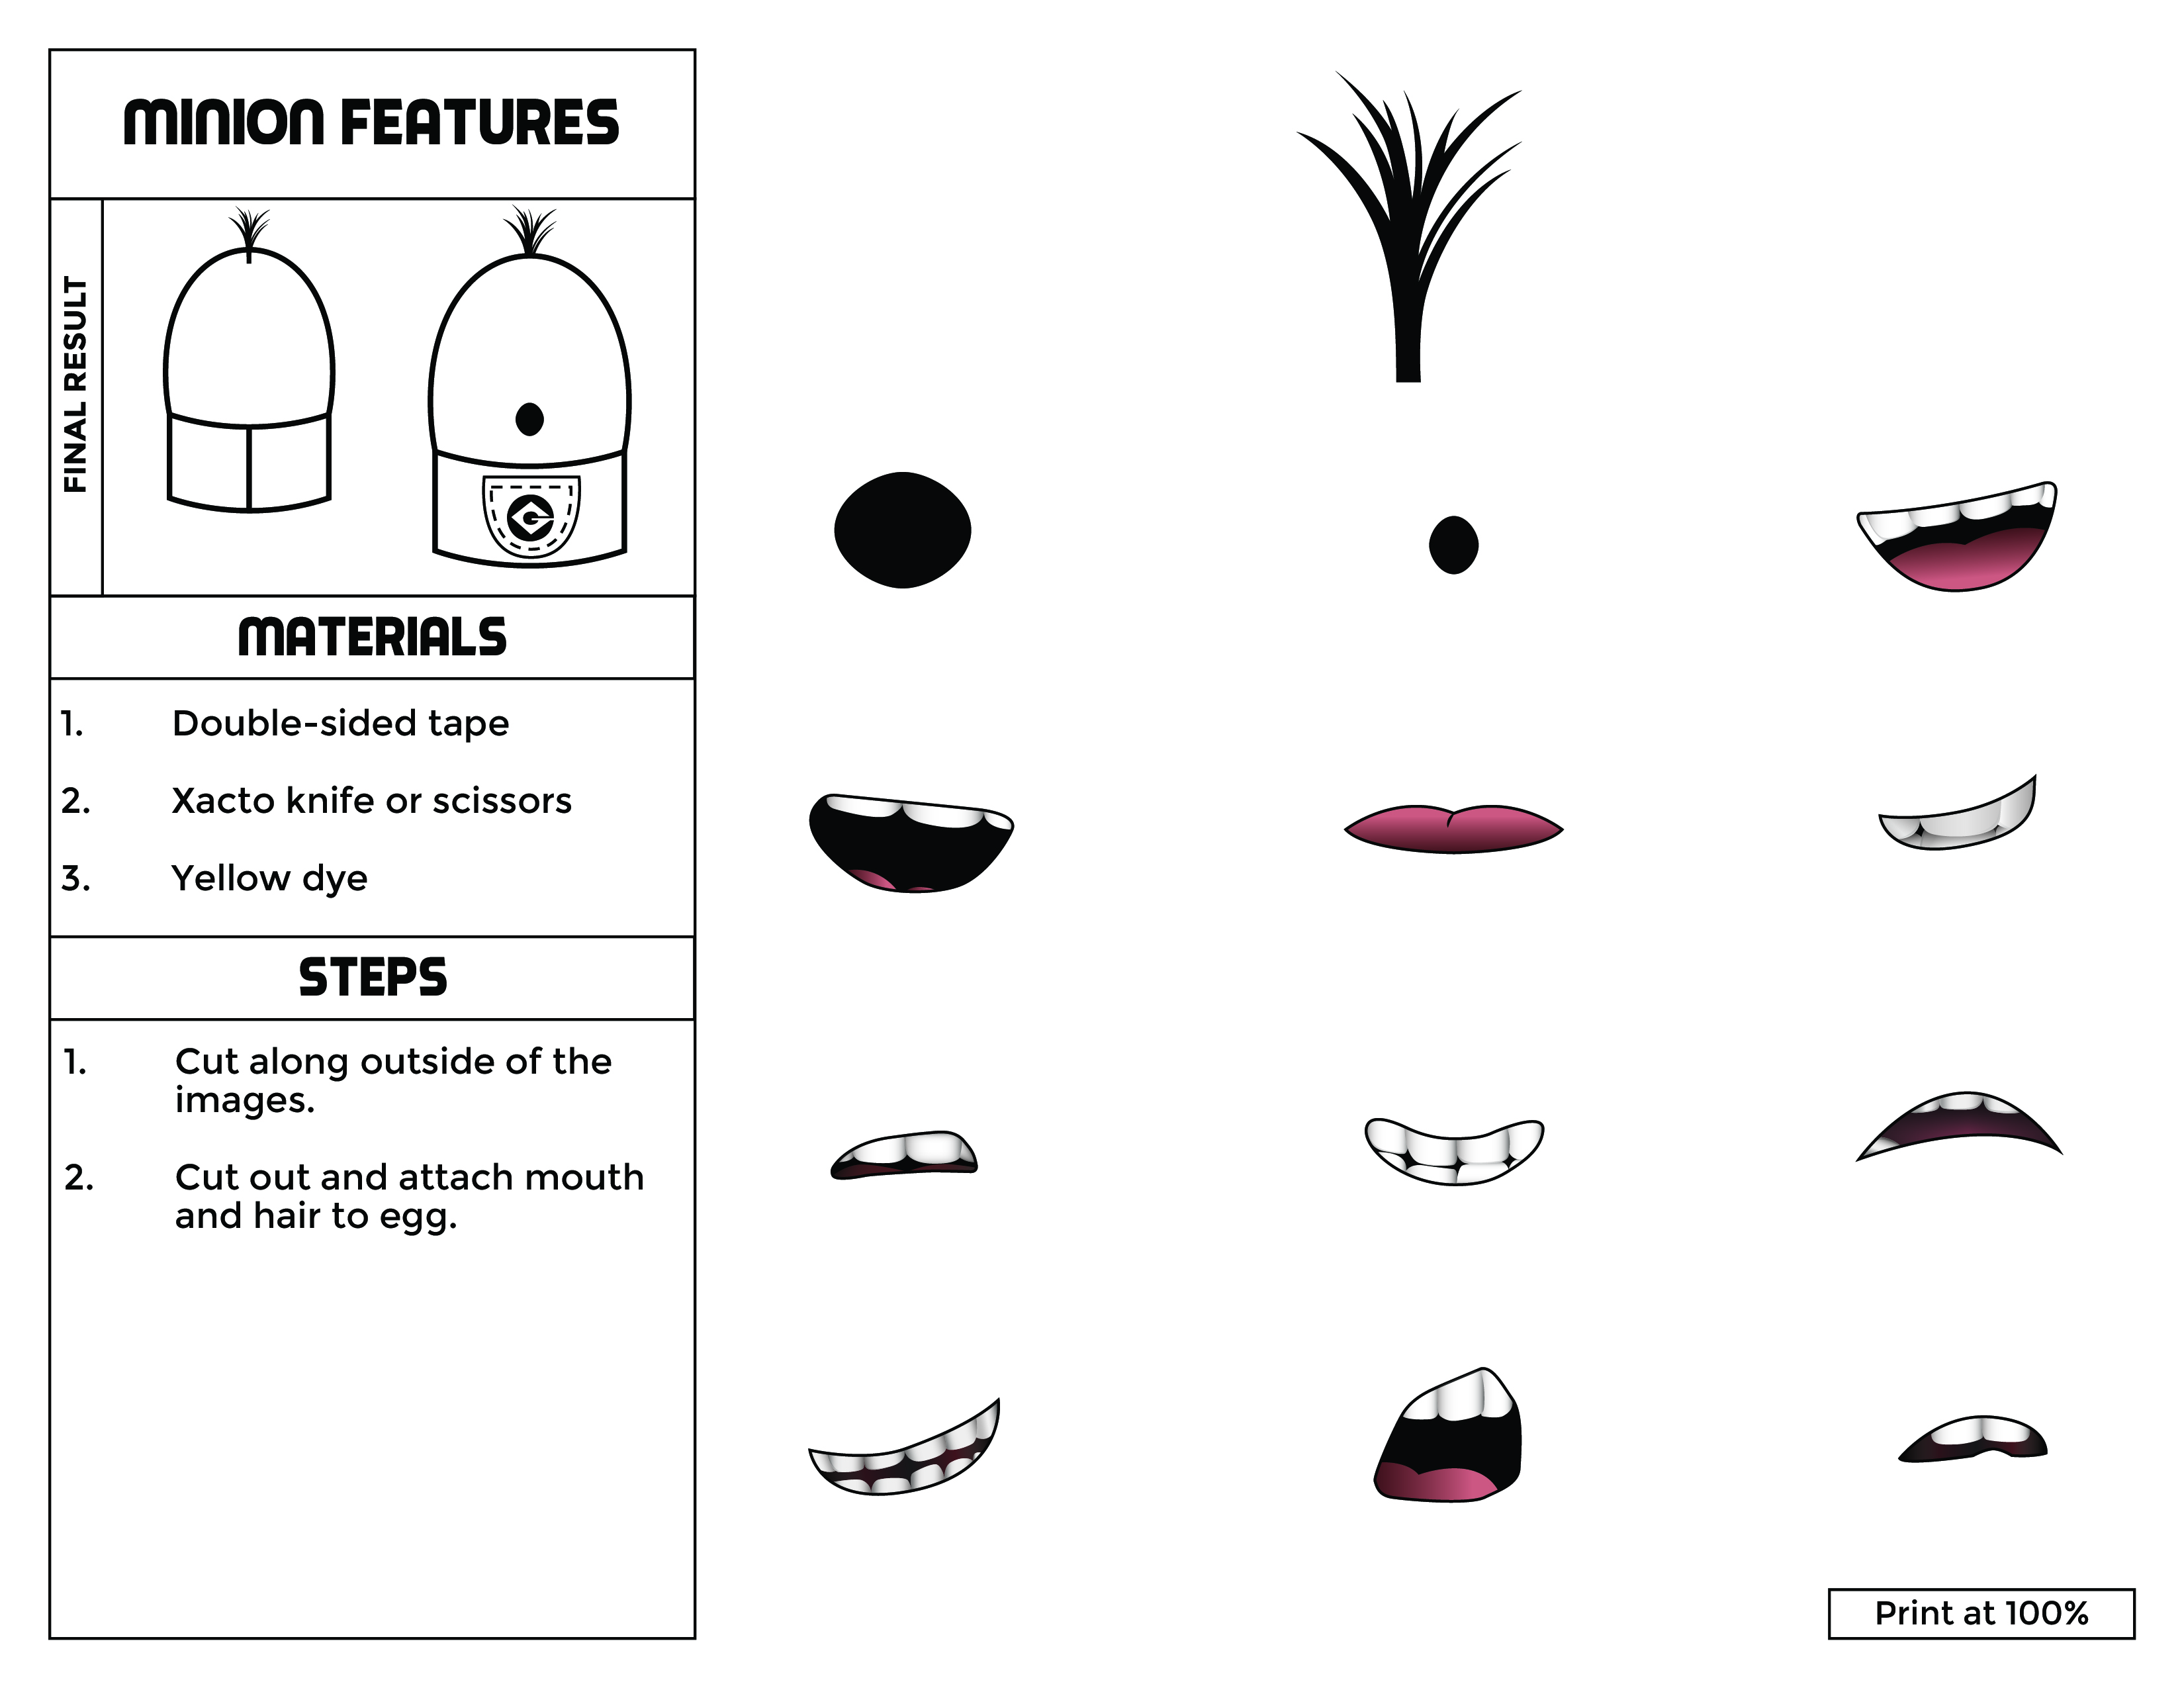 6-best-images-of-printable-minion-mouths-free-printable-minion-goggles-minion-mouth-template